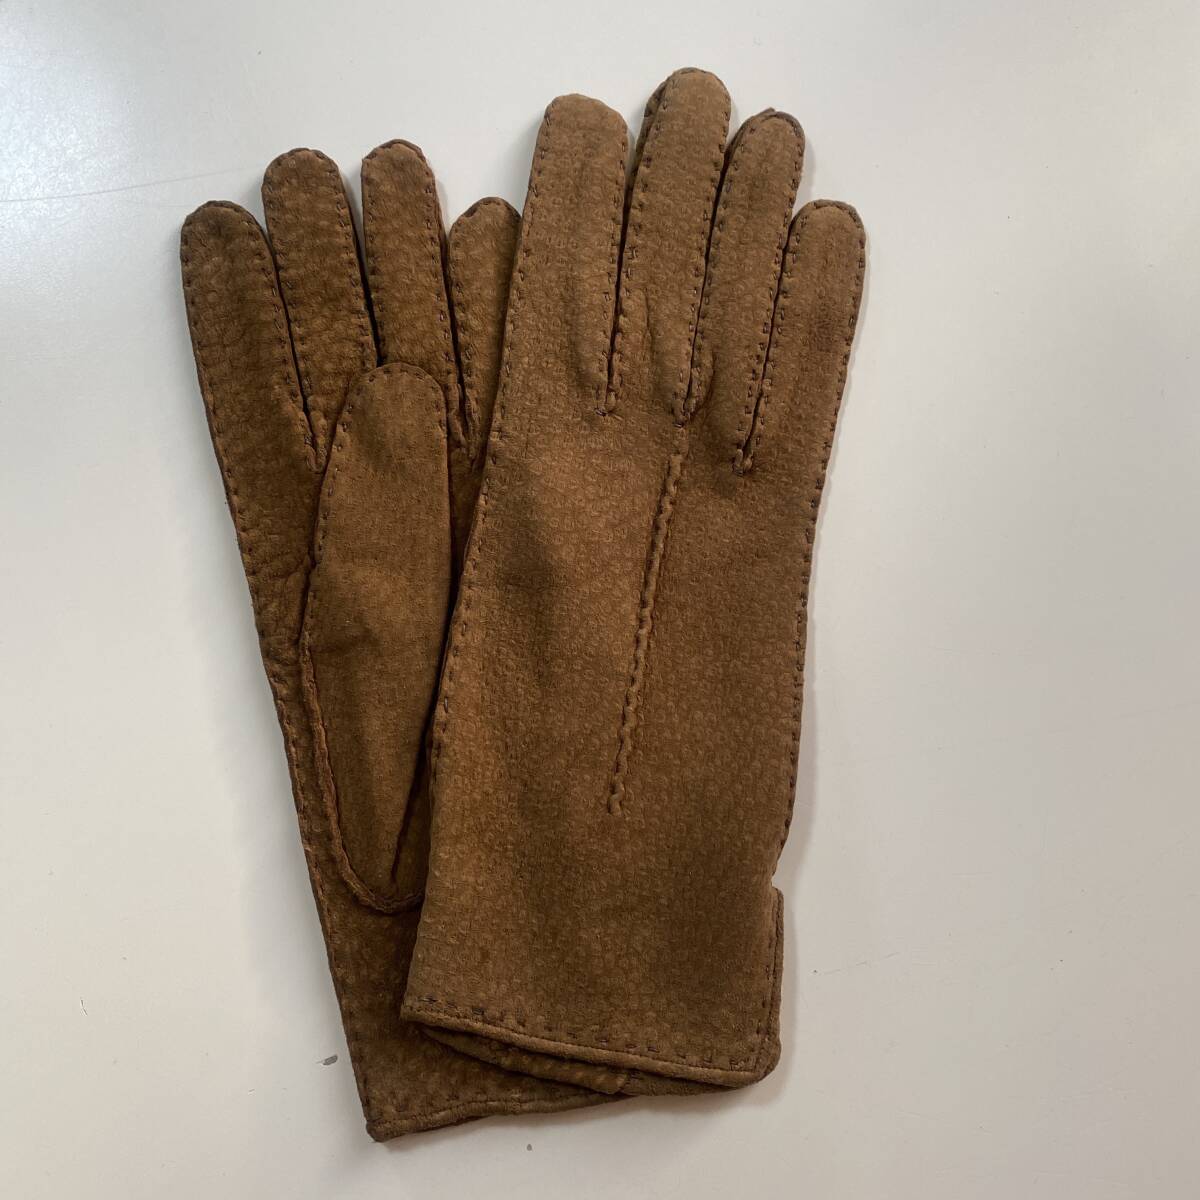 [ unused ] Argentina made lady's suede leather glove Brown leather gloves size 7 lining less kapi rose leather 